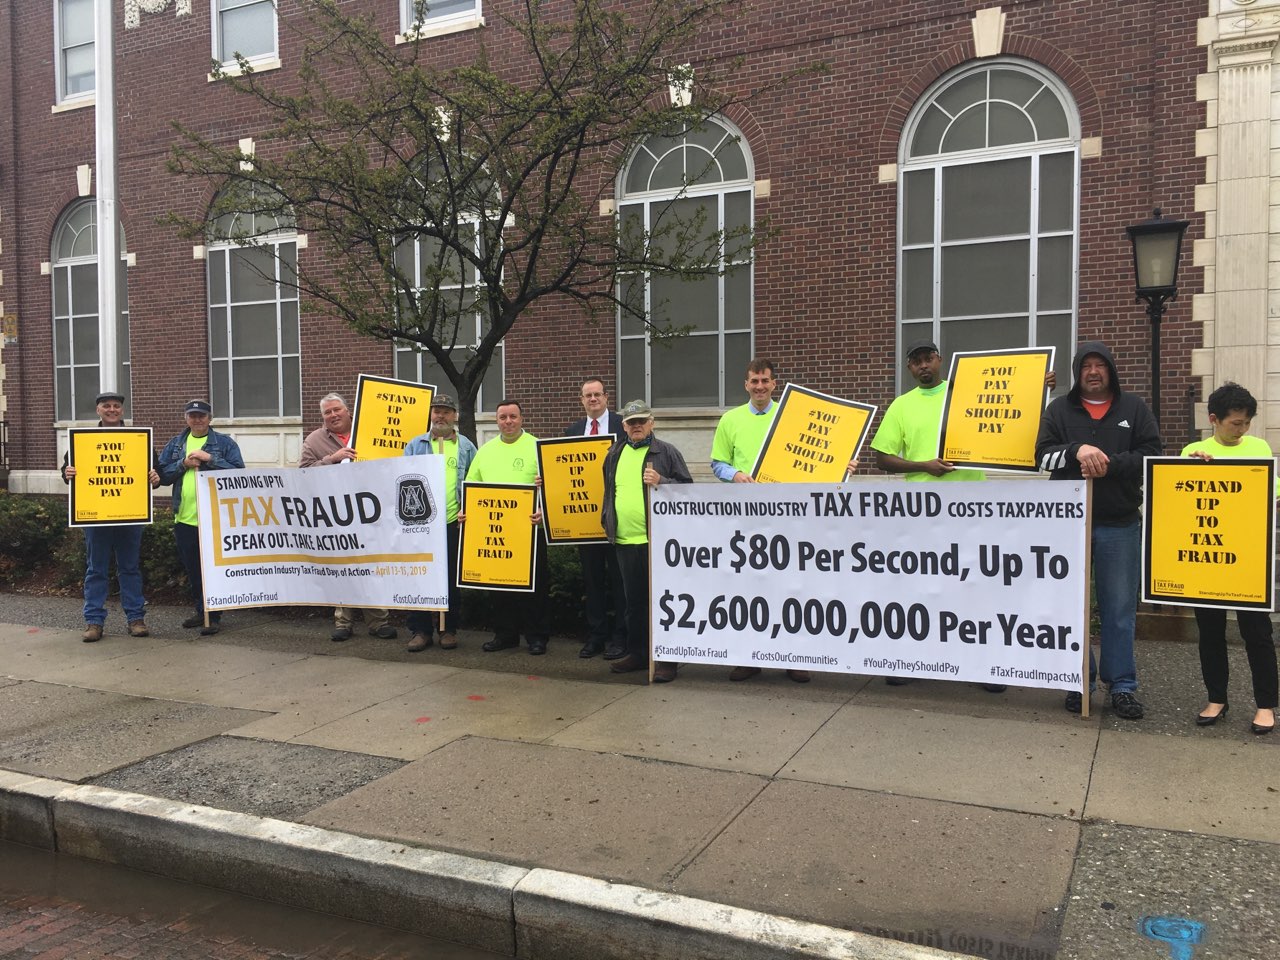 Assemblyman Karl Brabenec (R,C,I-Deerpark) [fifth from left] joins local officials and labor leaders for a rally to prevent wage theft and tax fraud in front of the Newburgh Post Office on Monday, April 15.